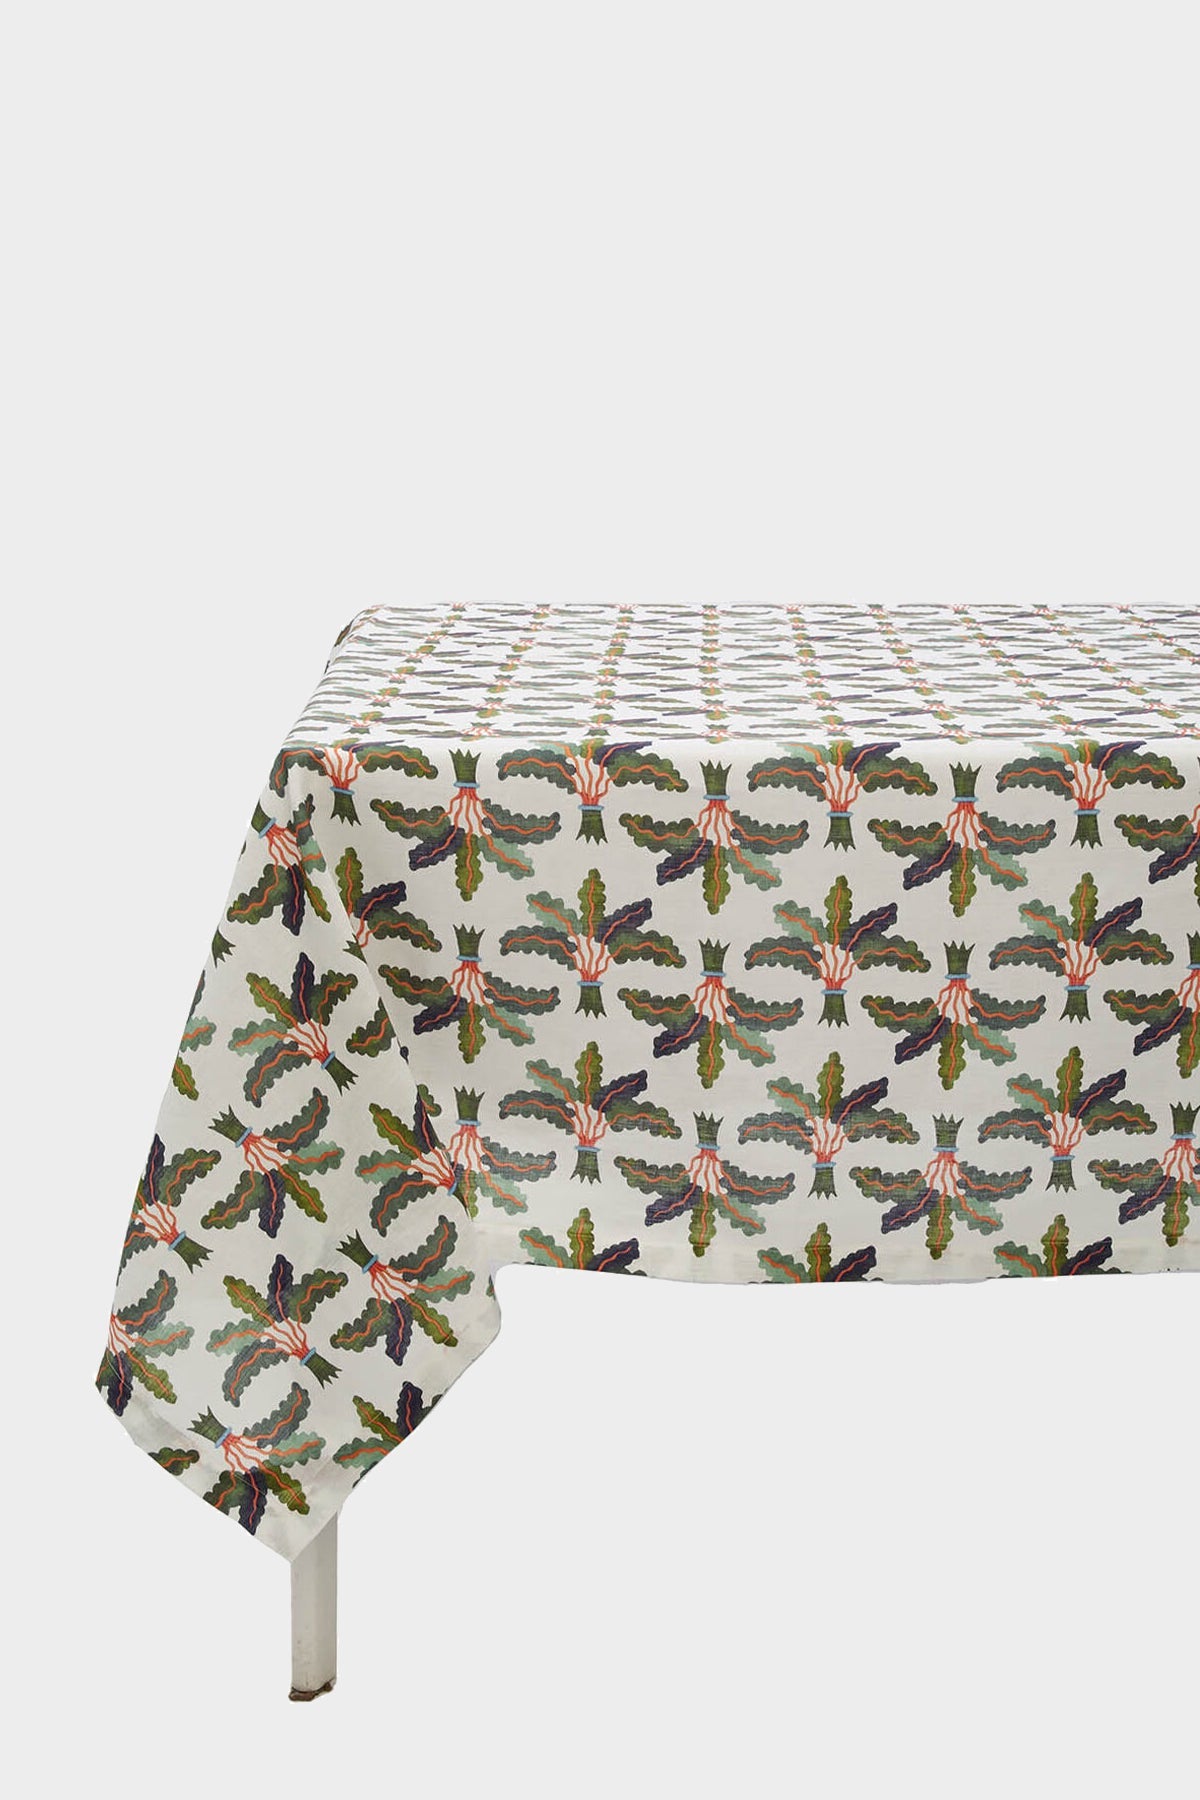 Large Tablecloth (70inx137in) in Palms - shop-olivia.com